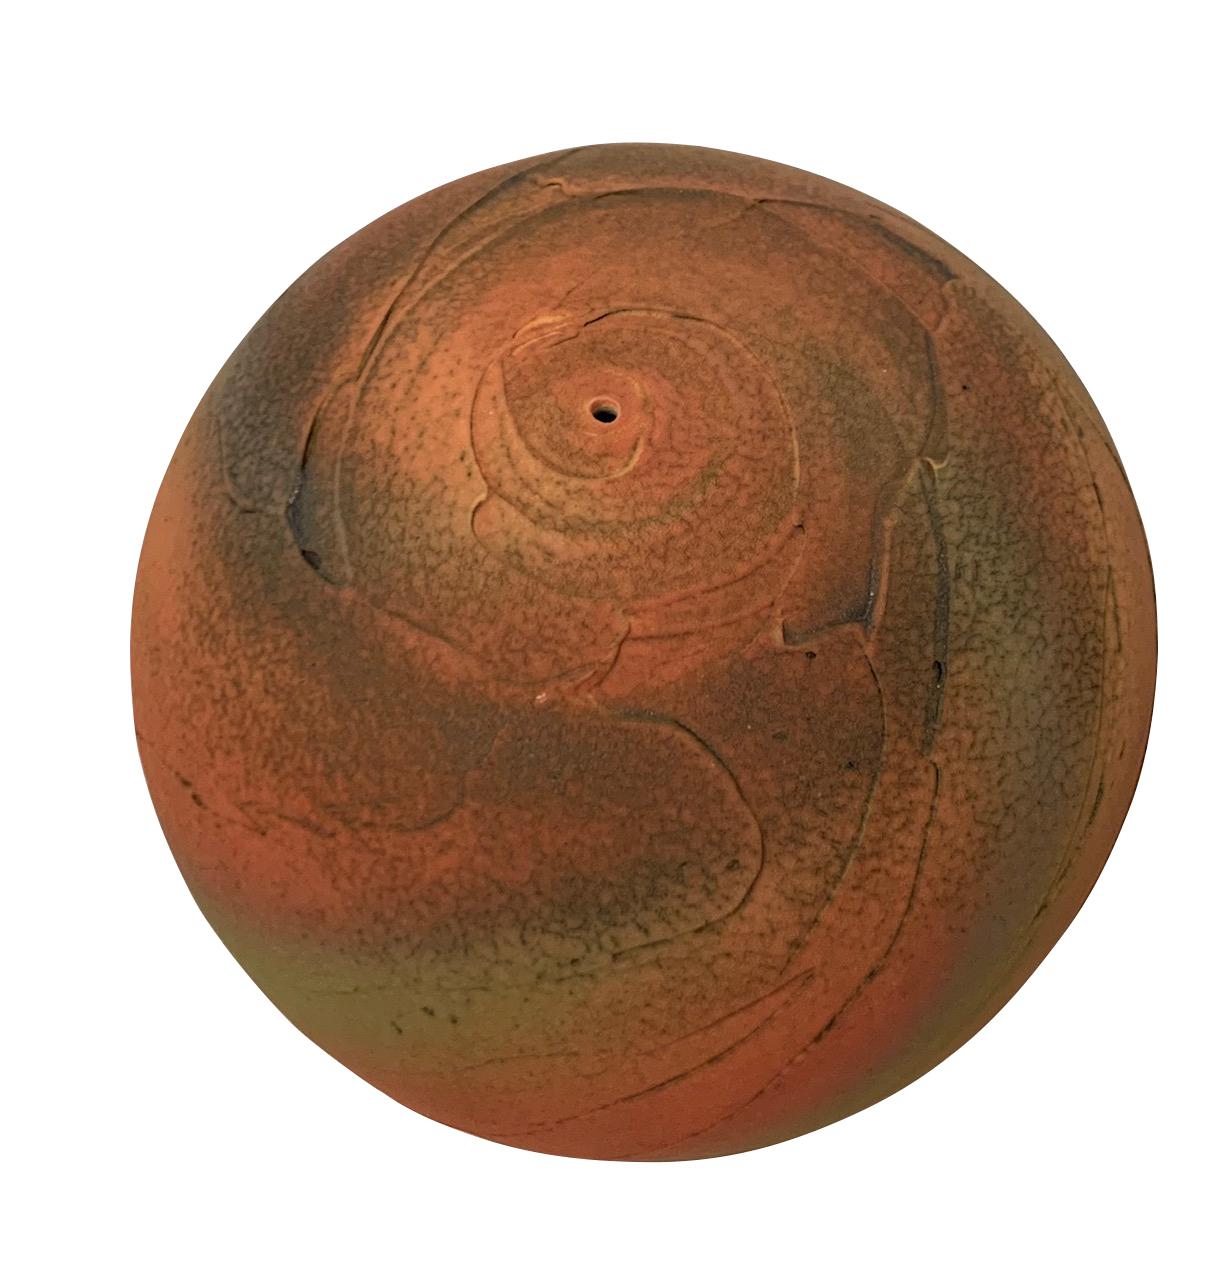 Contemporary textured round ceramic earthenware vase.
Classical shape textural design vase inspired by the landscape. 
Bright bottle orange in spiral bands with a shot of green.
The vase design has an ancient feel.
Hand made one of a kind.
Part